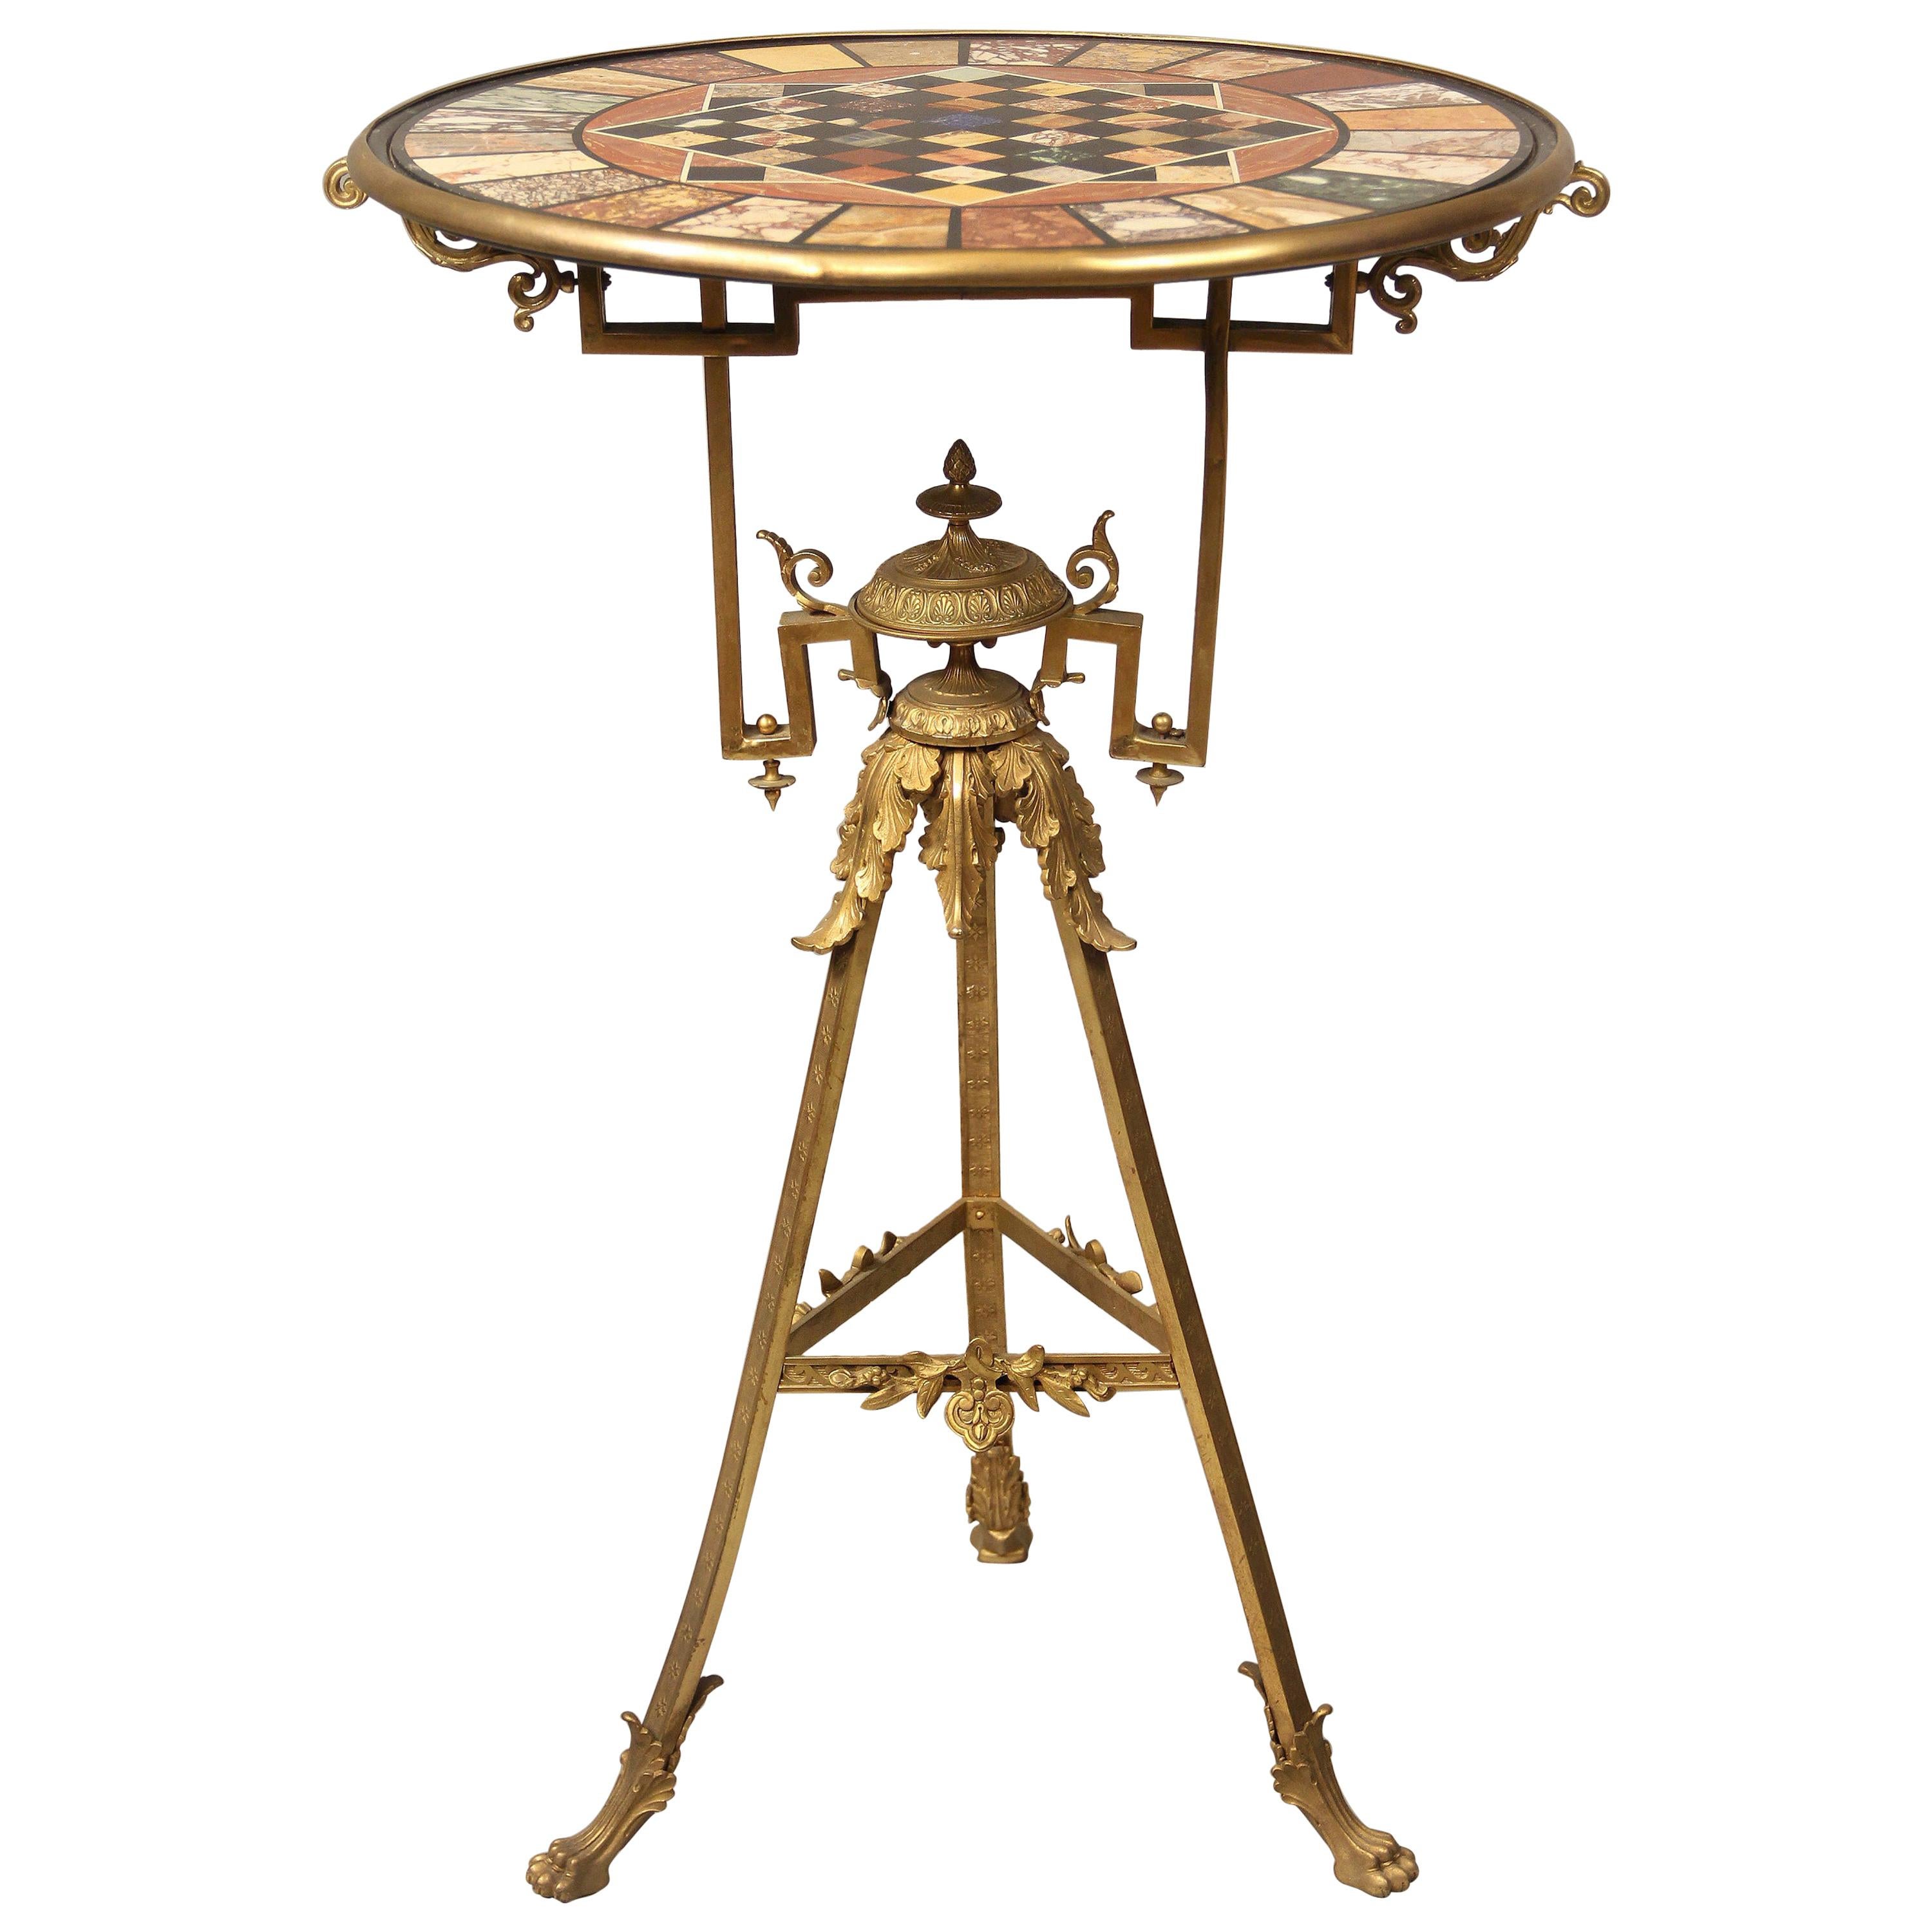 Very Interesting Late 19th Century Gilt Bronze Specimen Marble-Top Game Table